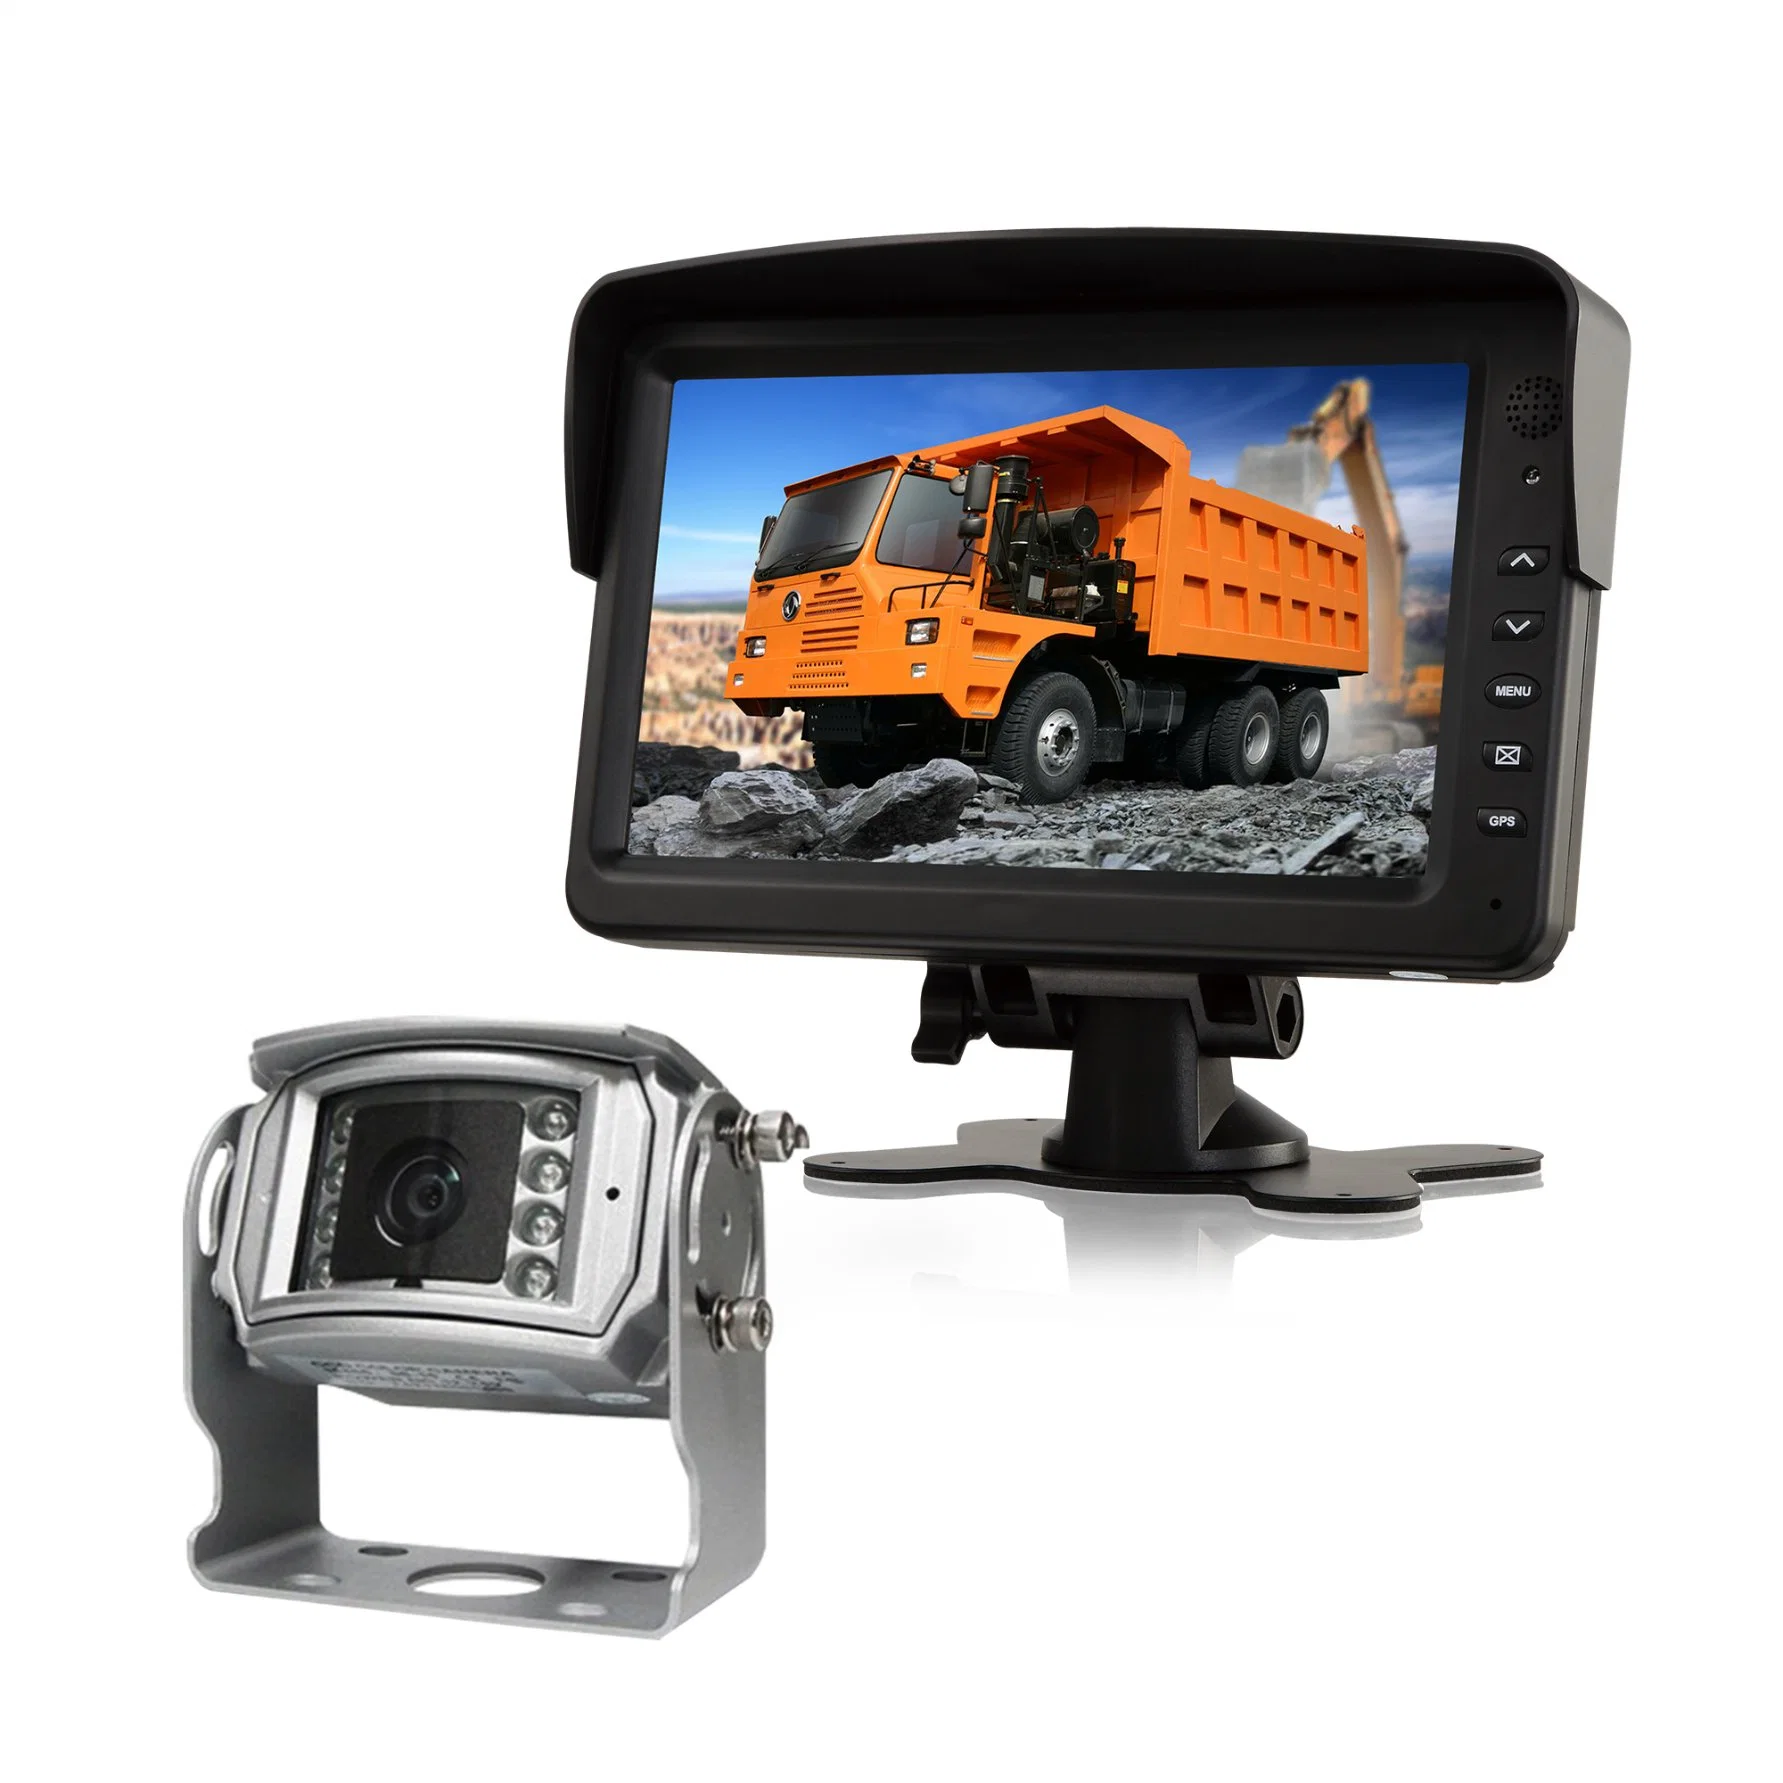 7" Rear View Backup/Reversing System for Truck/Bus/Car with CCD Camera